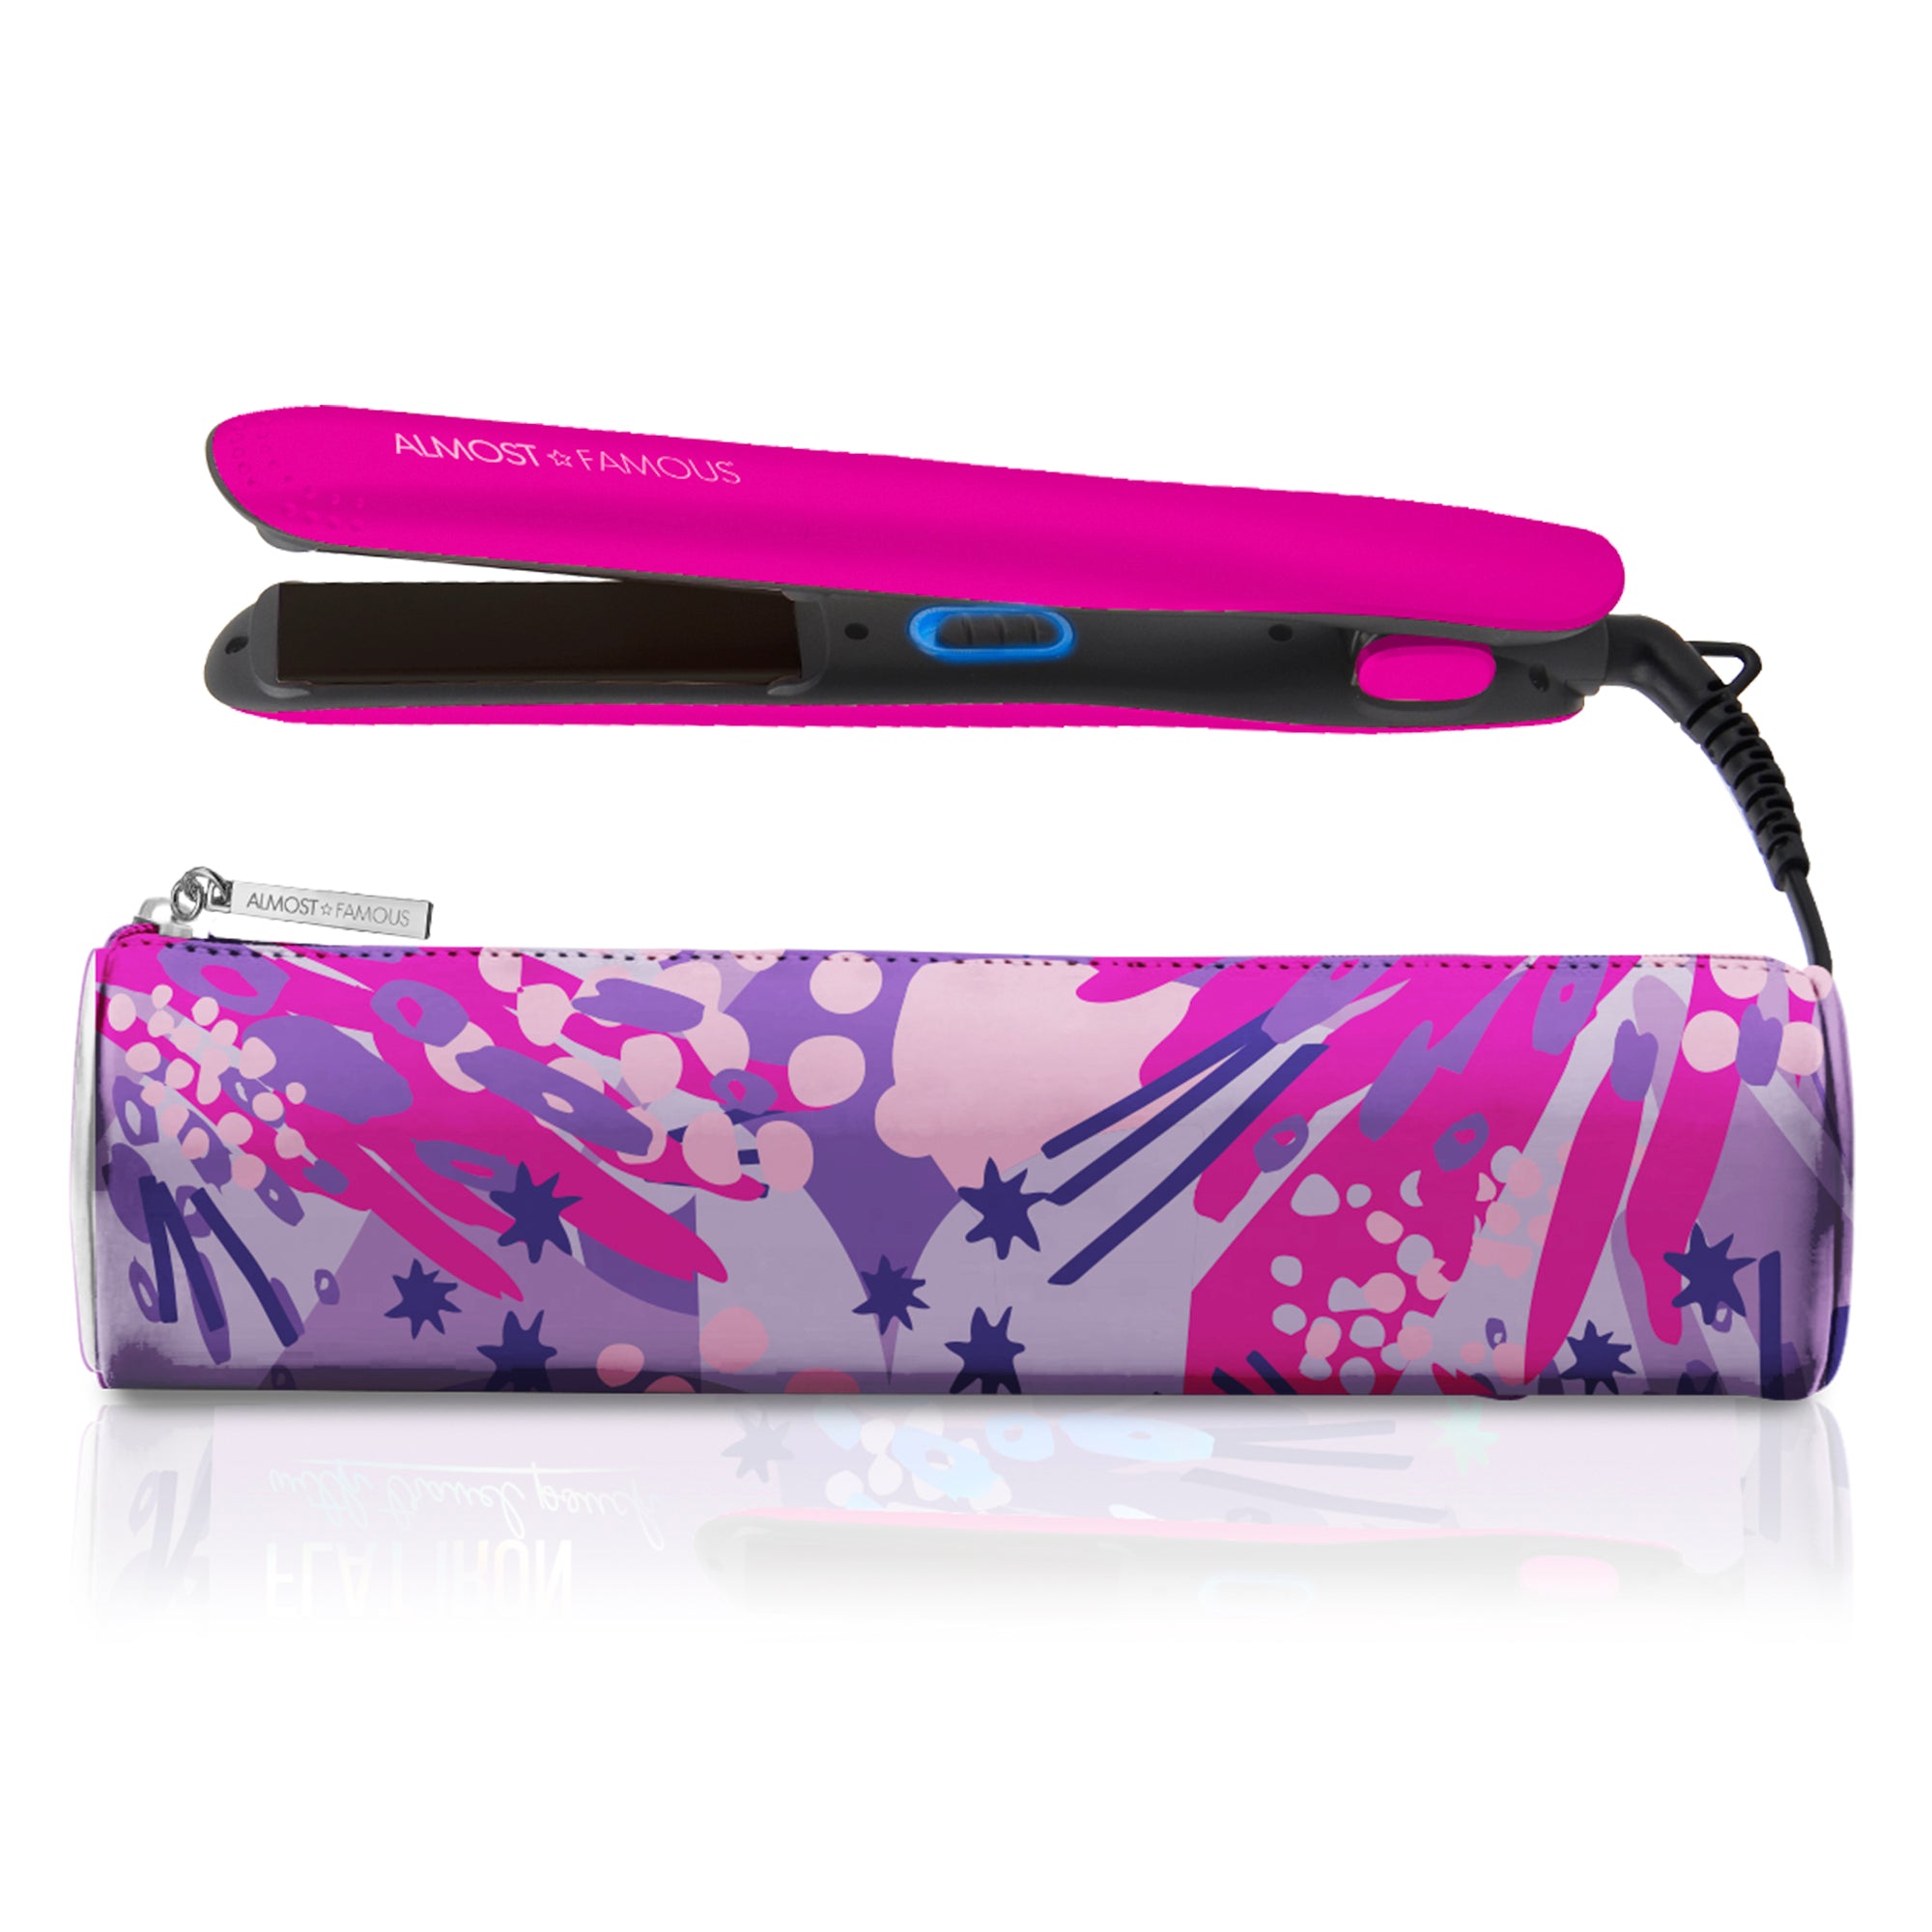 "Fierce Glam" Flat Iron with Travel Pouch